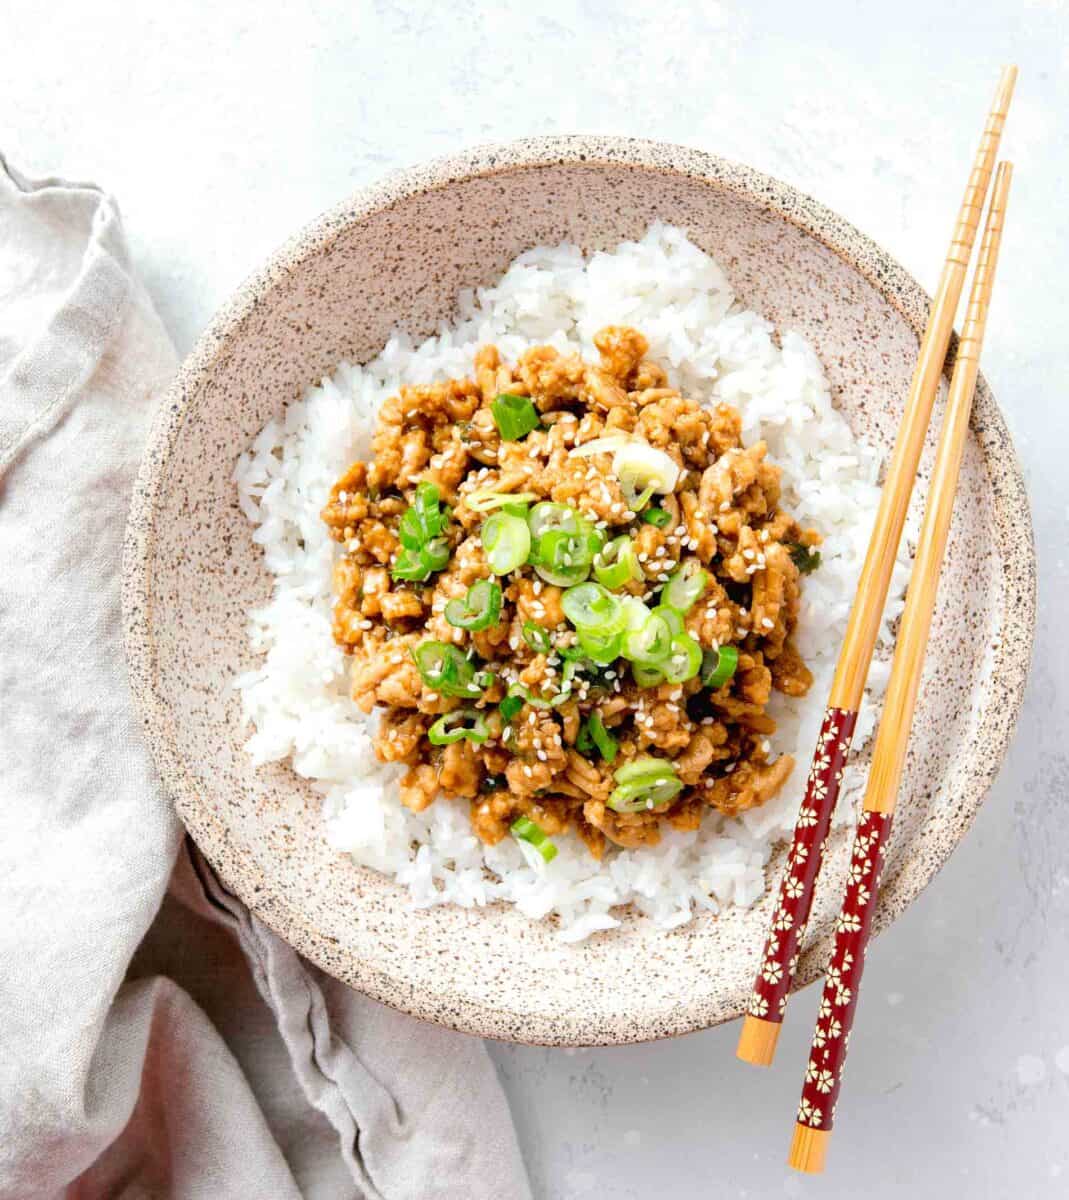 ground chicken teriyaki in a speckled brown bowl on top of white rice. wooden chopsticks are laying on top of the bowl which is next to a linen towel